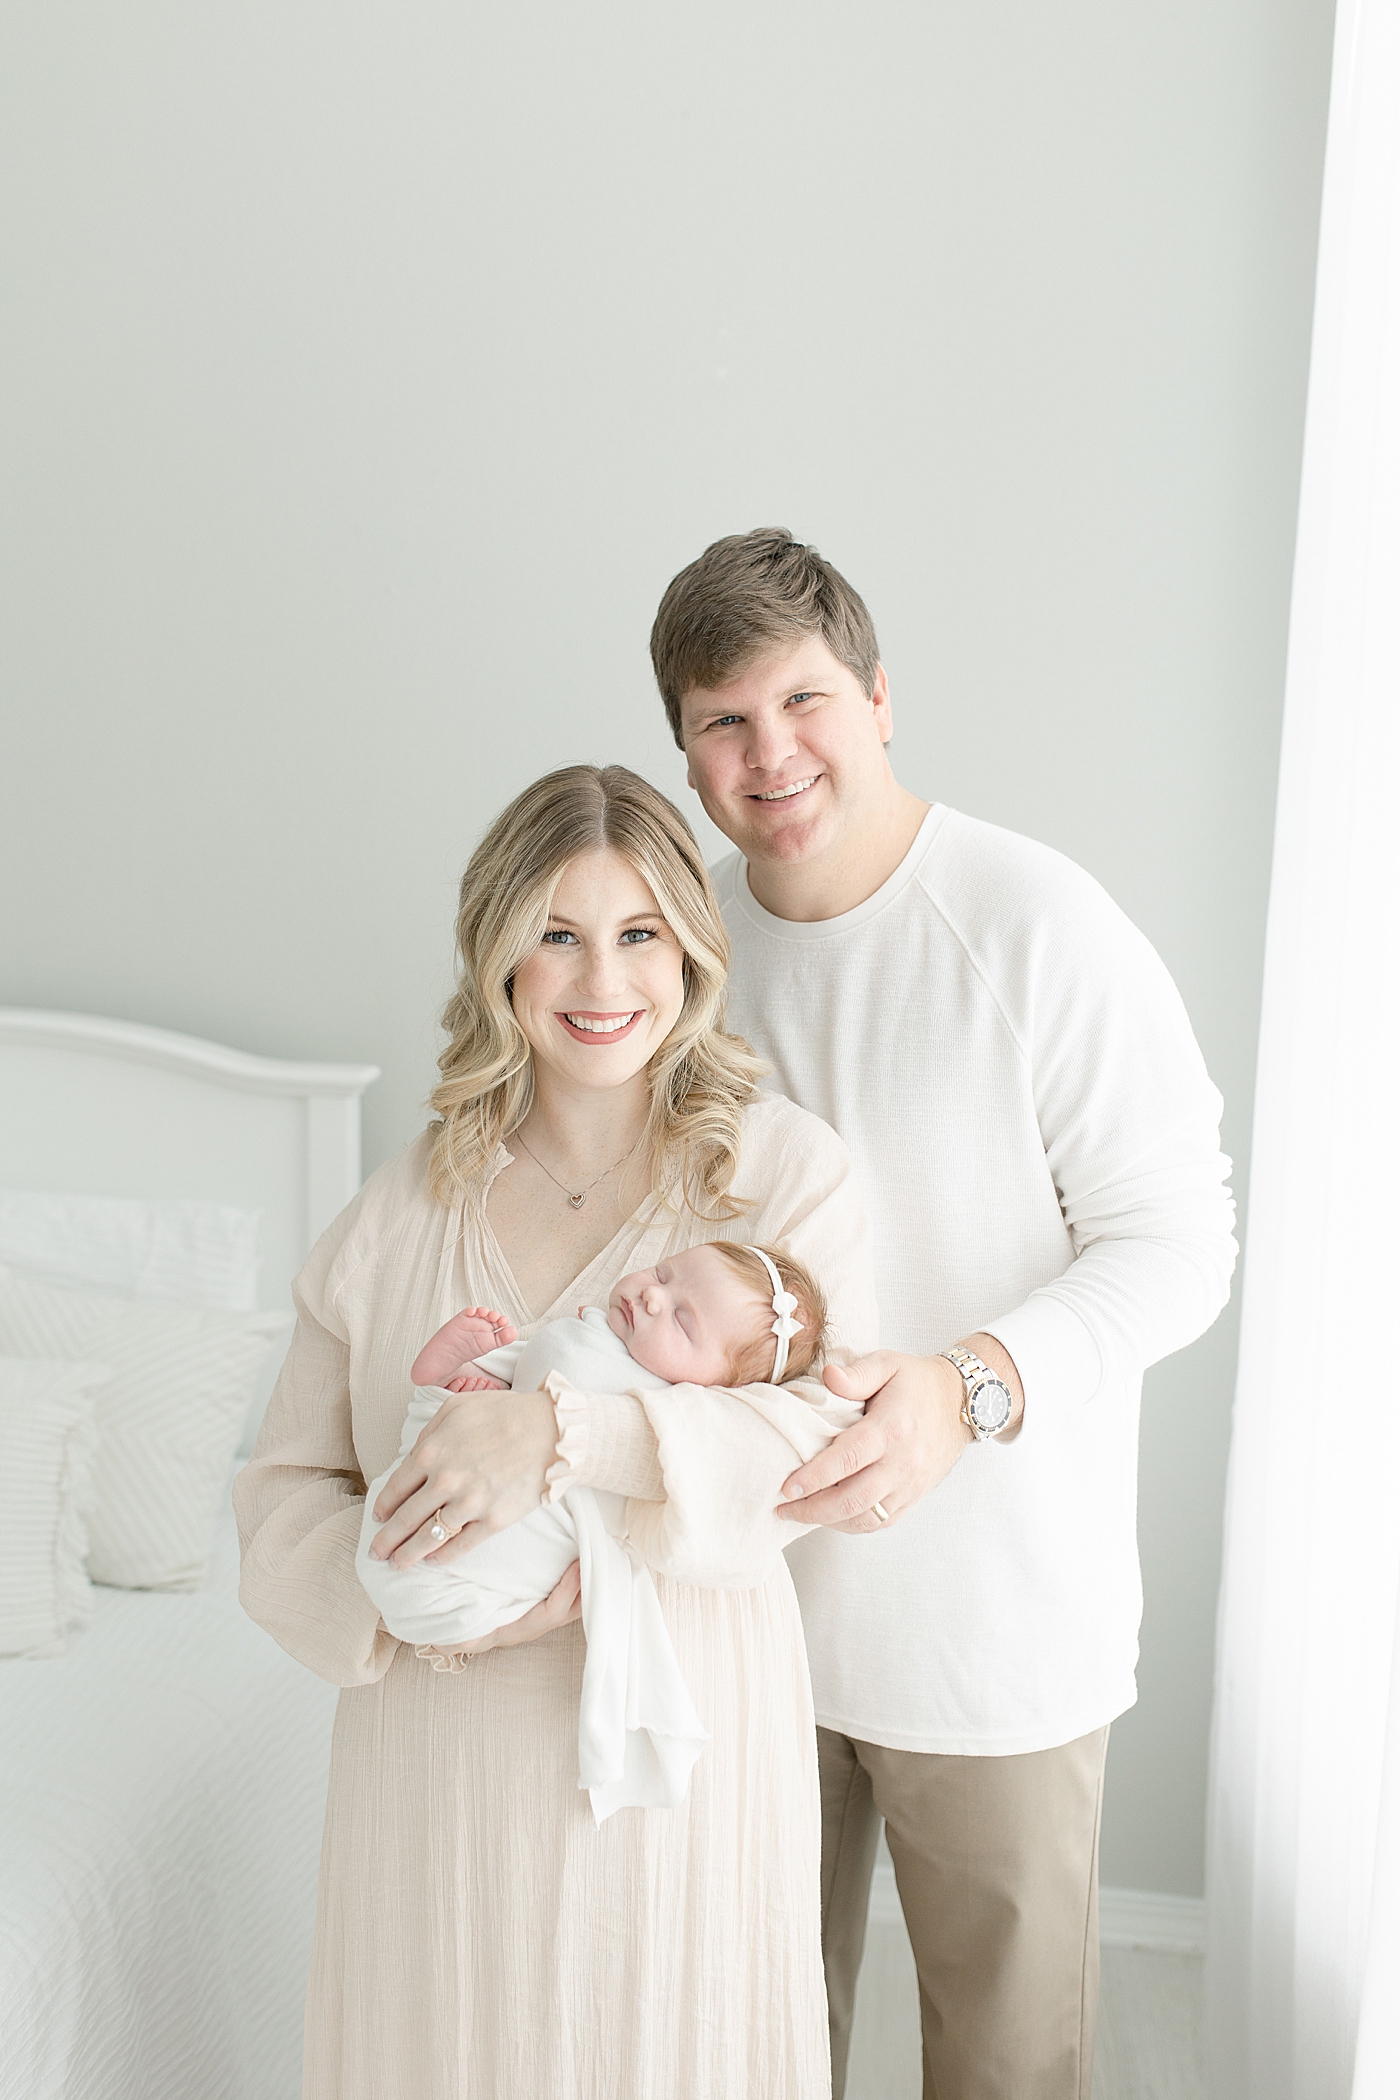 Mom and dad smiling holding their newborn baby girl | Photo by Little Sunshine Photography